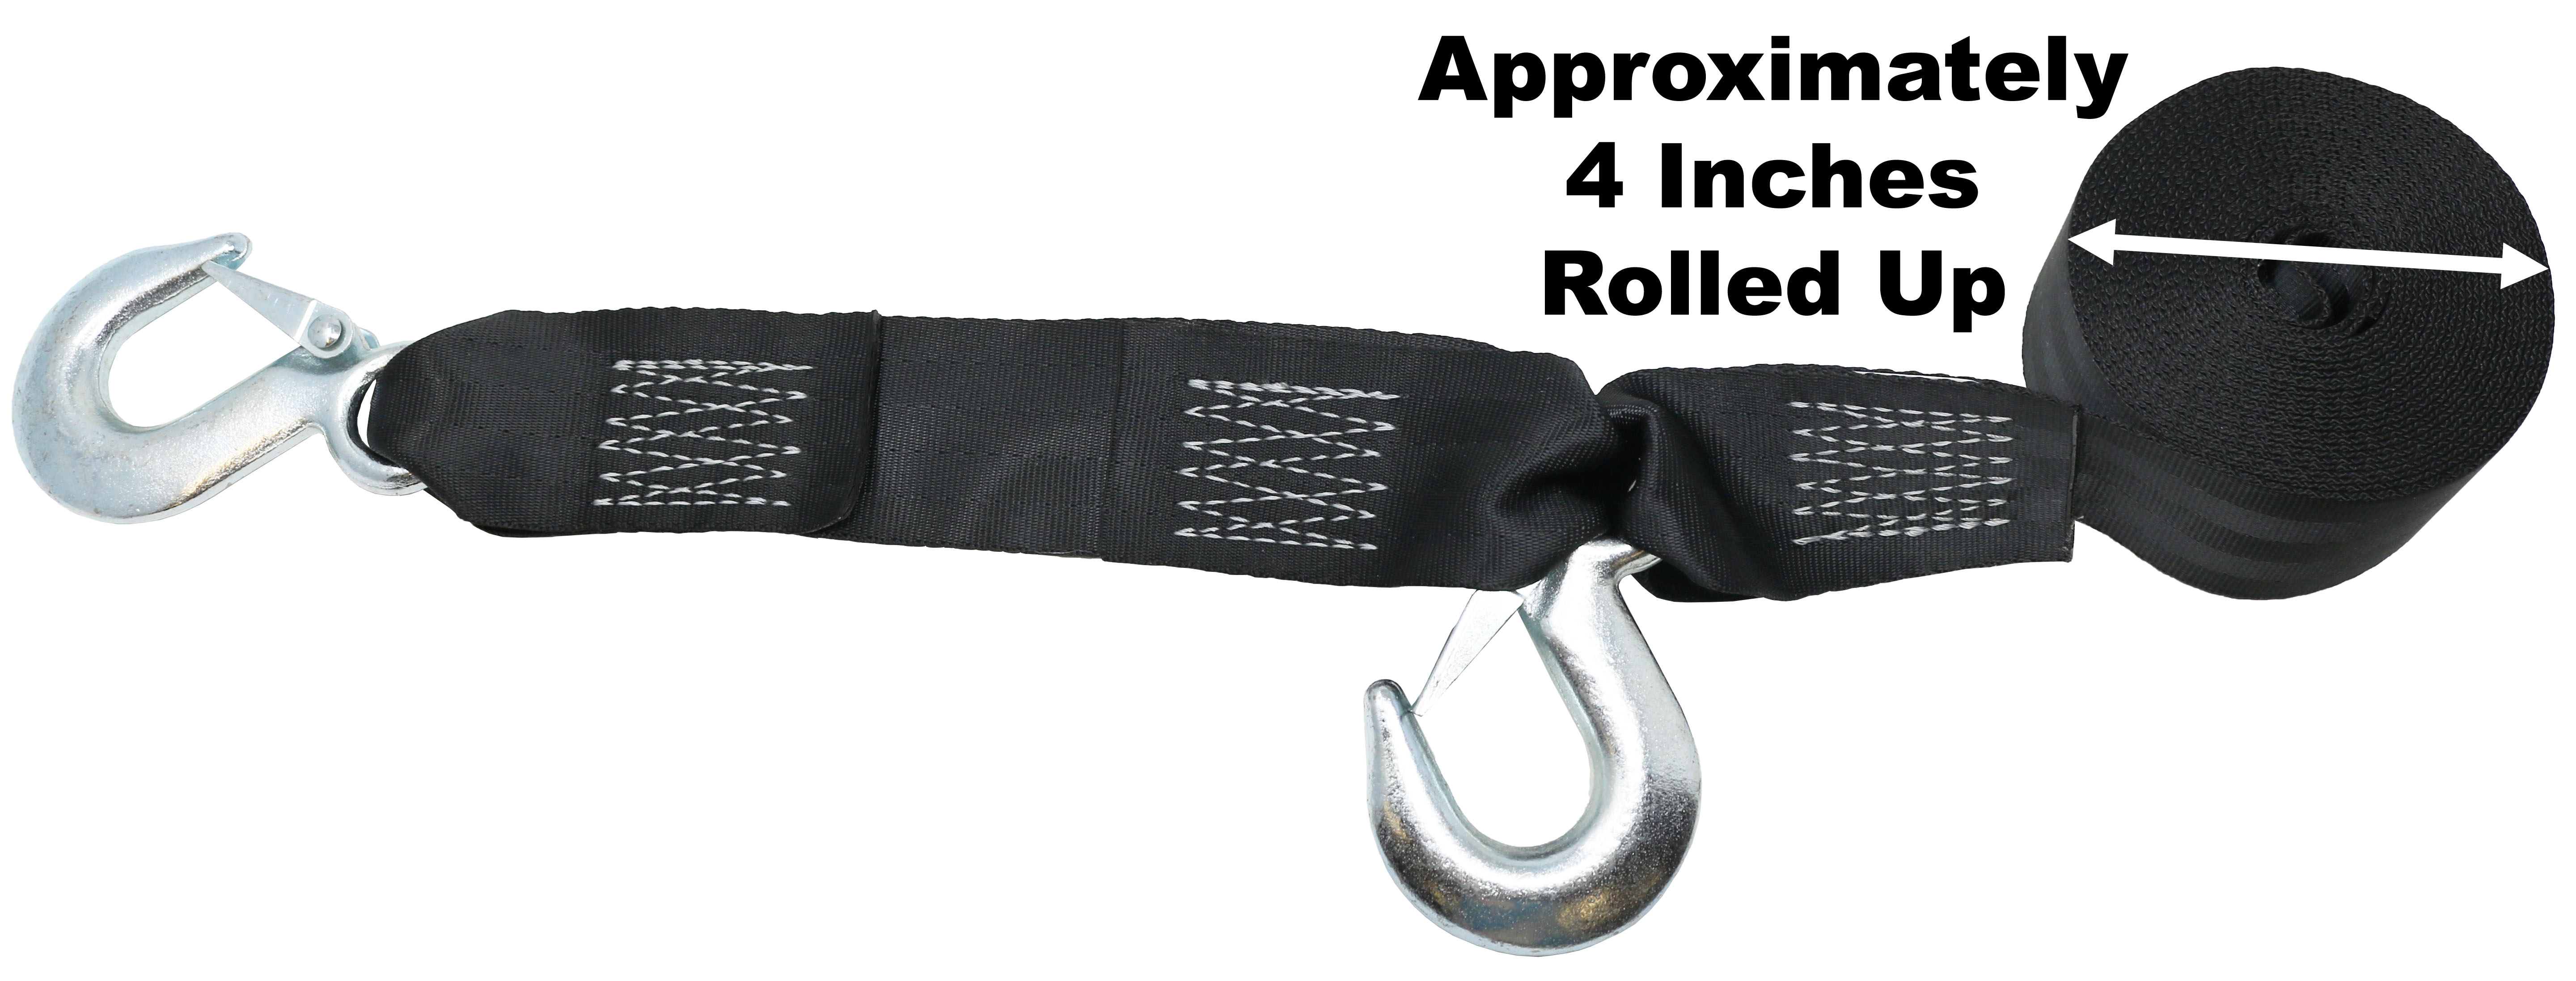 CustomTieDowns 2 Inch x 20 Foot Black Winch Strap With A Forged Snap Hook.  10 Inch Safety Strap With A Snap Hook. 1 Inch Loop For Attachment To Winch. - image 2 of 3